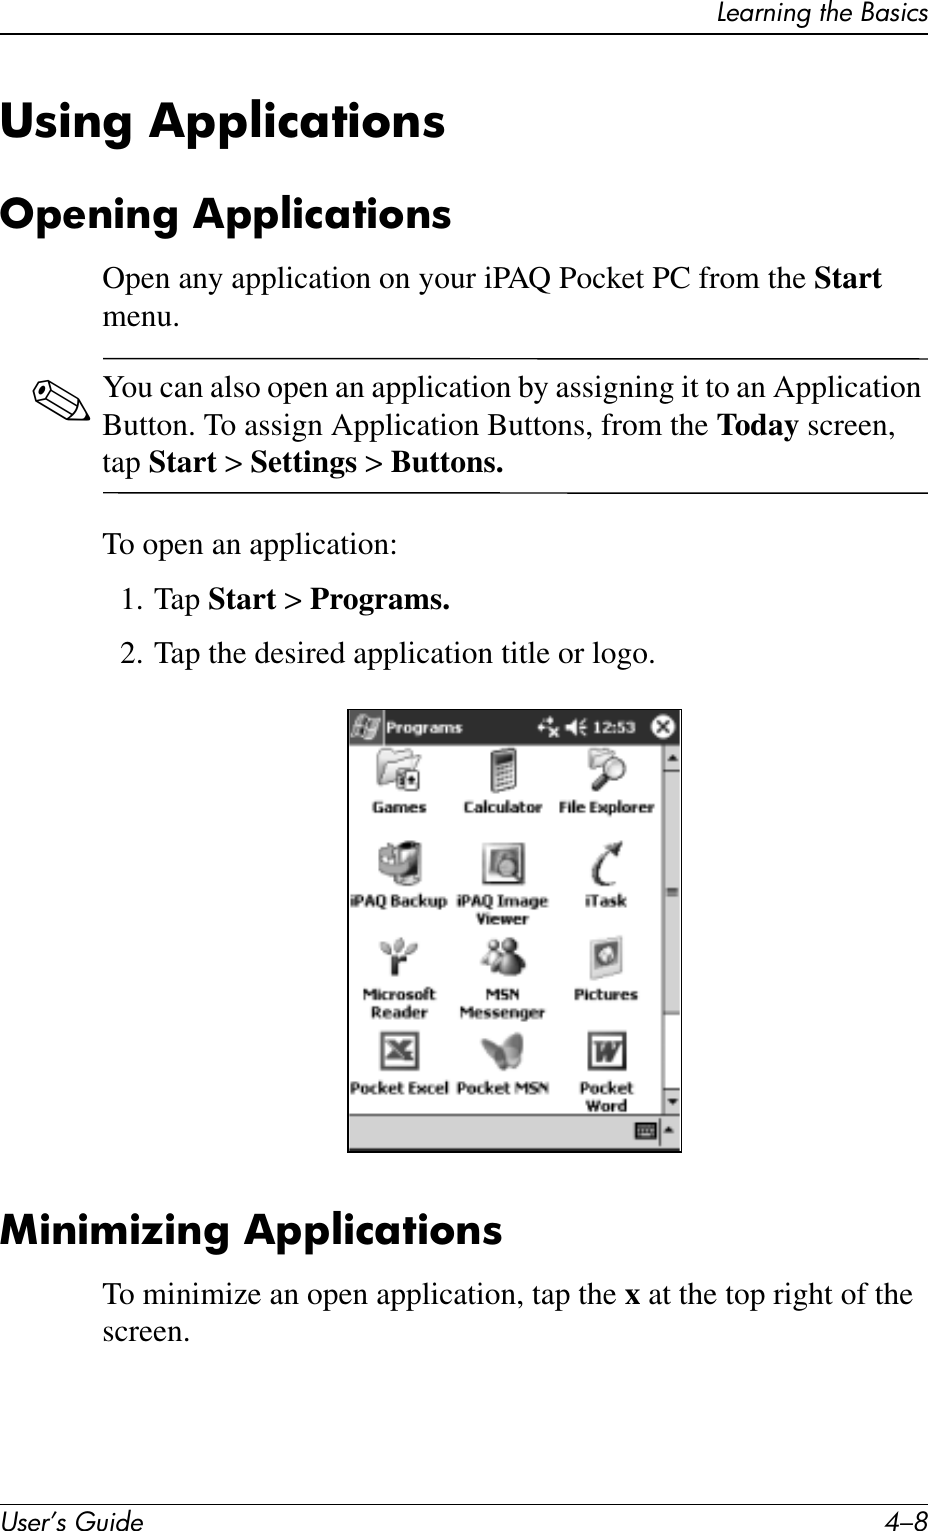 User’s Guide 4–8Learning the BasicsUsing ApplicationsOpening ApplicationsOpen any application on your iPAQ Pocket PC from the Start menu. ✎You can also open an application by assigning it to an Application Button. To assign Application Buttons, from the Today screen, tap Start &gt; Settings &gt; Buttons.To open an application:1. Tap Start &gt; Programs.2. Tap the desired application title or logo.Minimizing ApplicationsTo minimize an open application, tap the x at the top right of the screen.